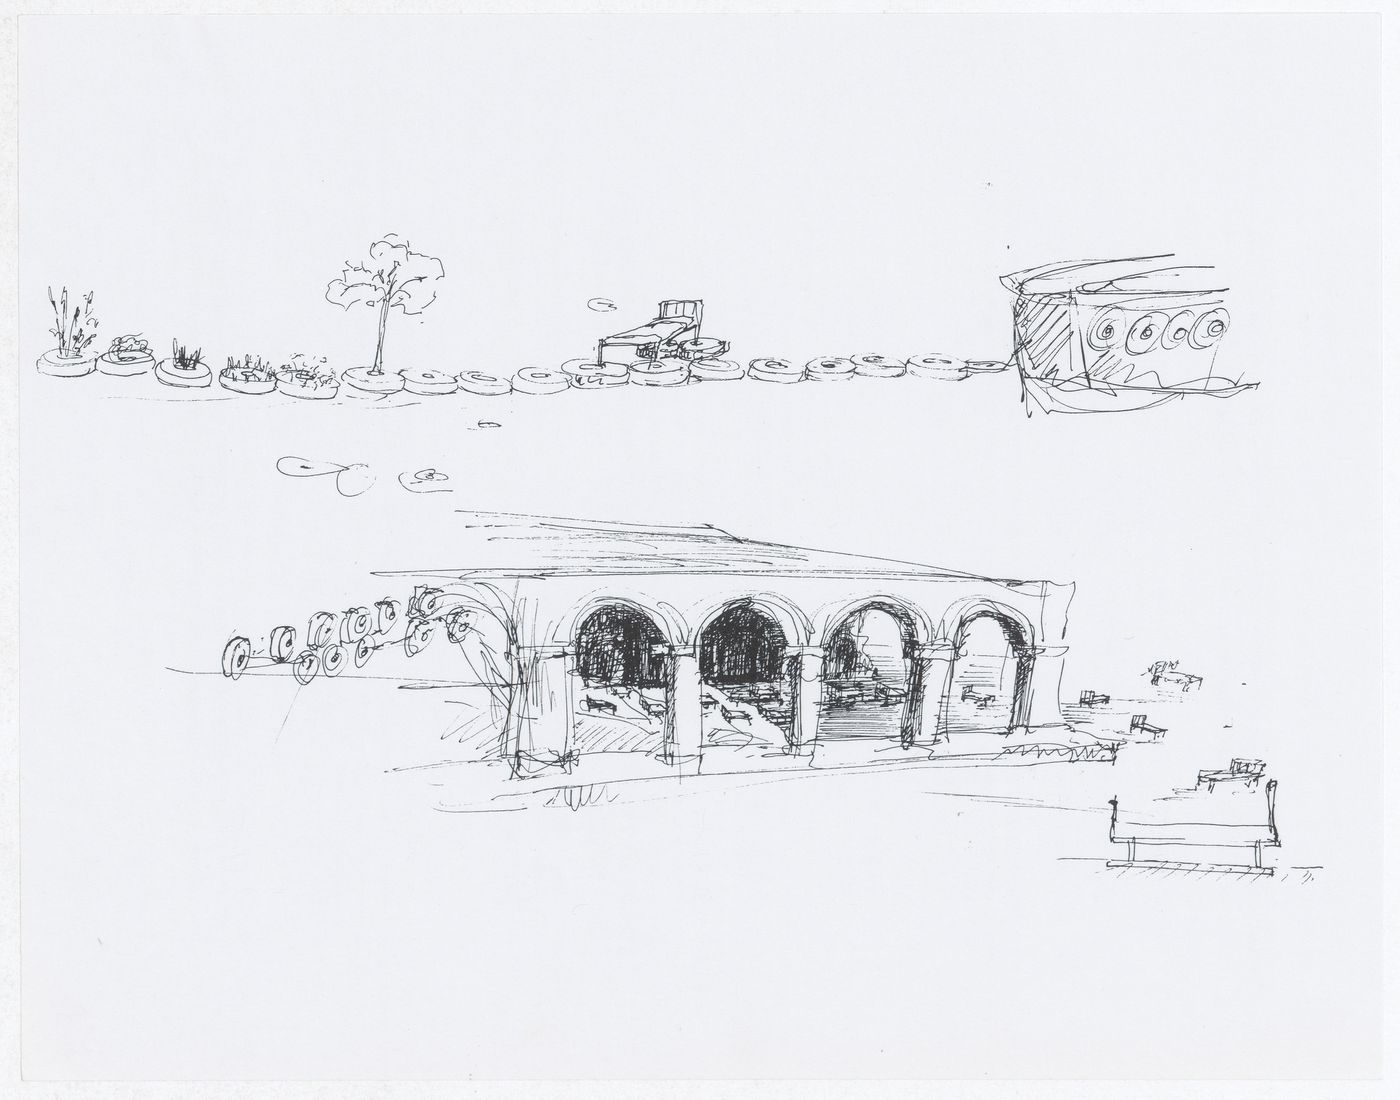 Drawing for the exhibition on James Wines at the Venice Biennale